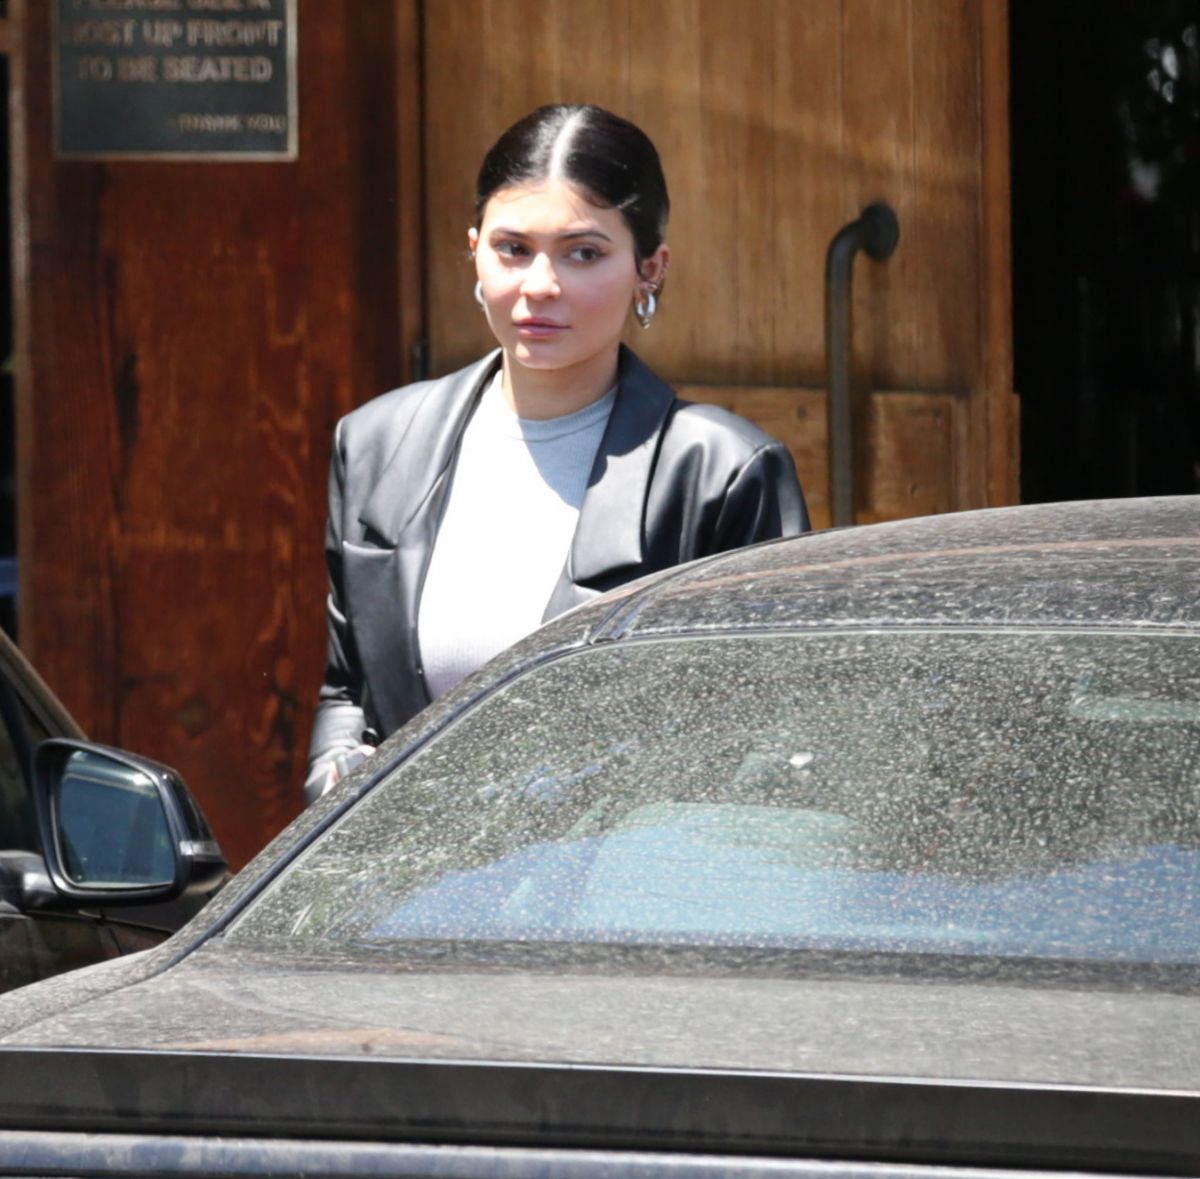 kylie-jenner-celebrates-mother-s-day-in-calabasas-05-12-2019-2.jpg